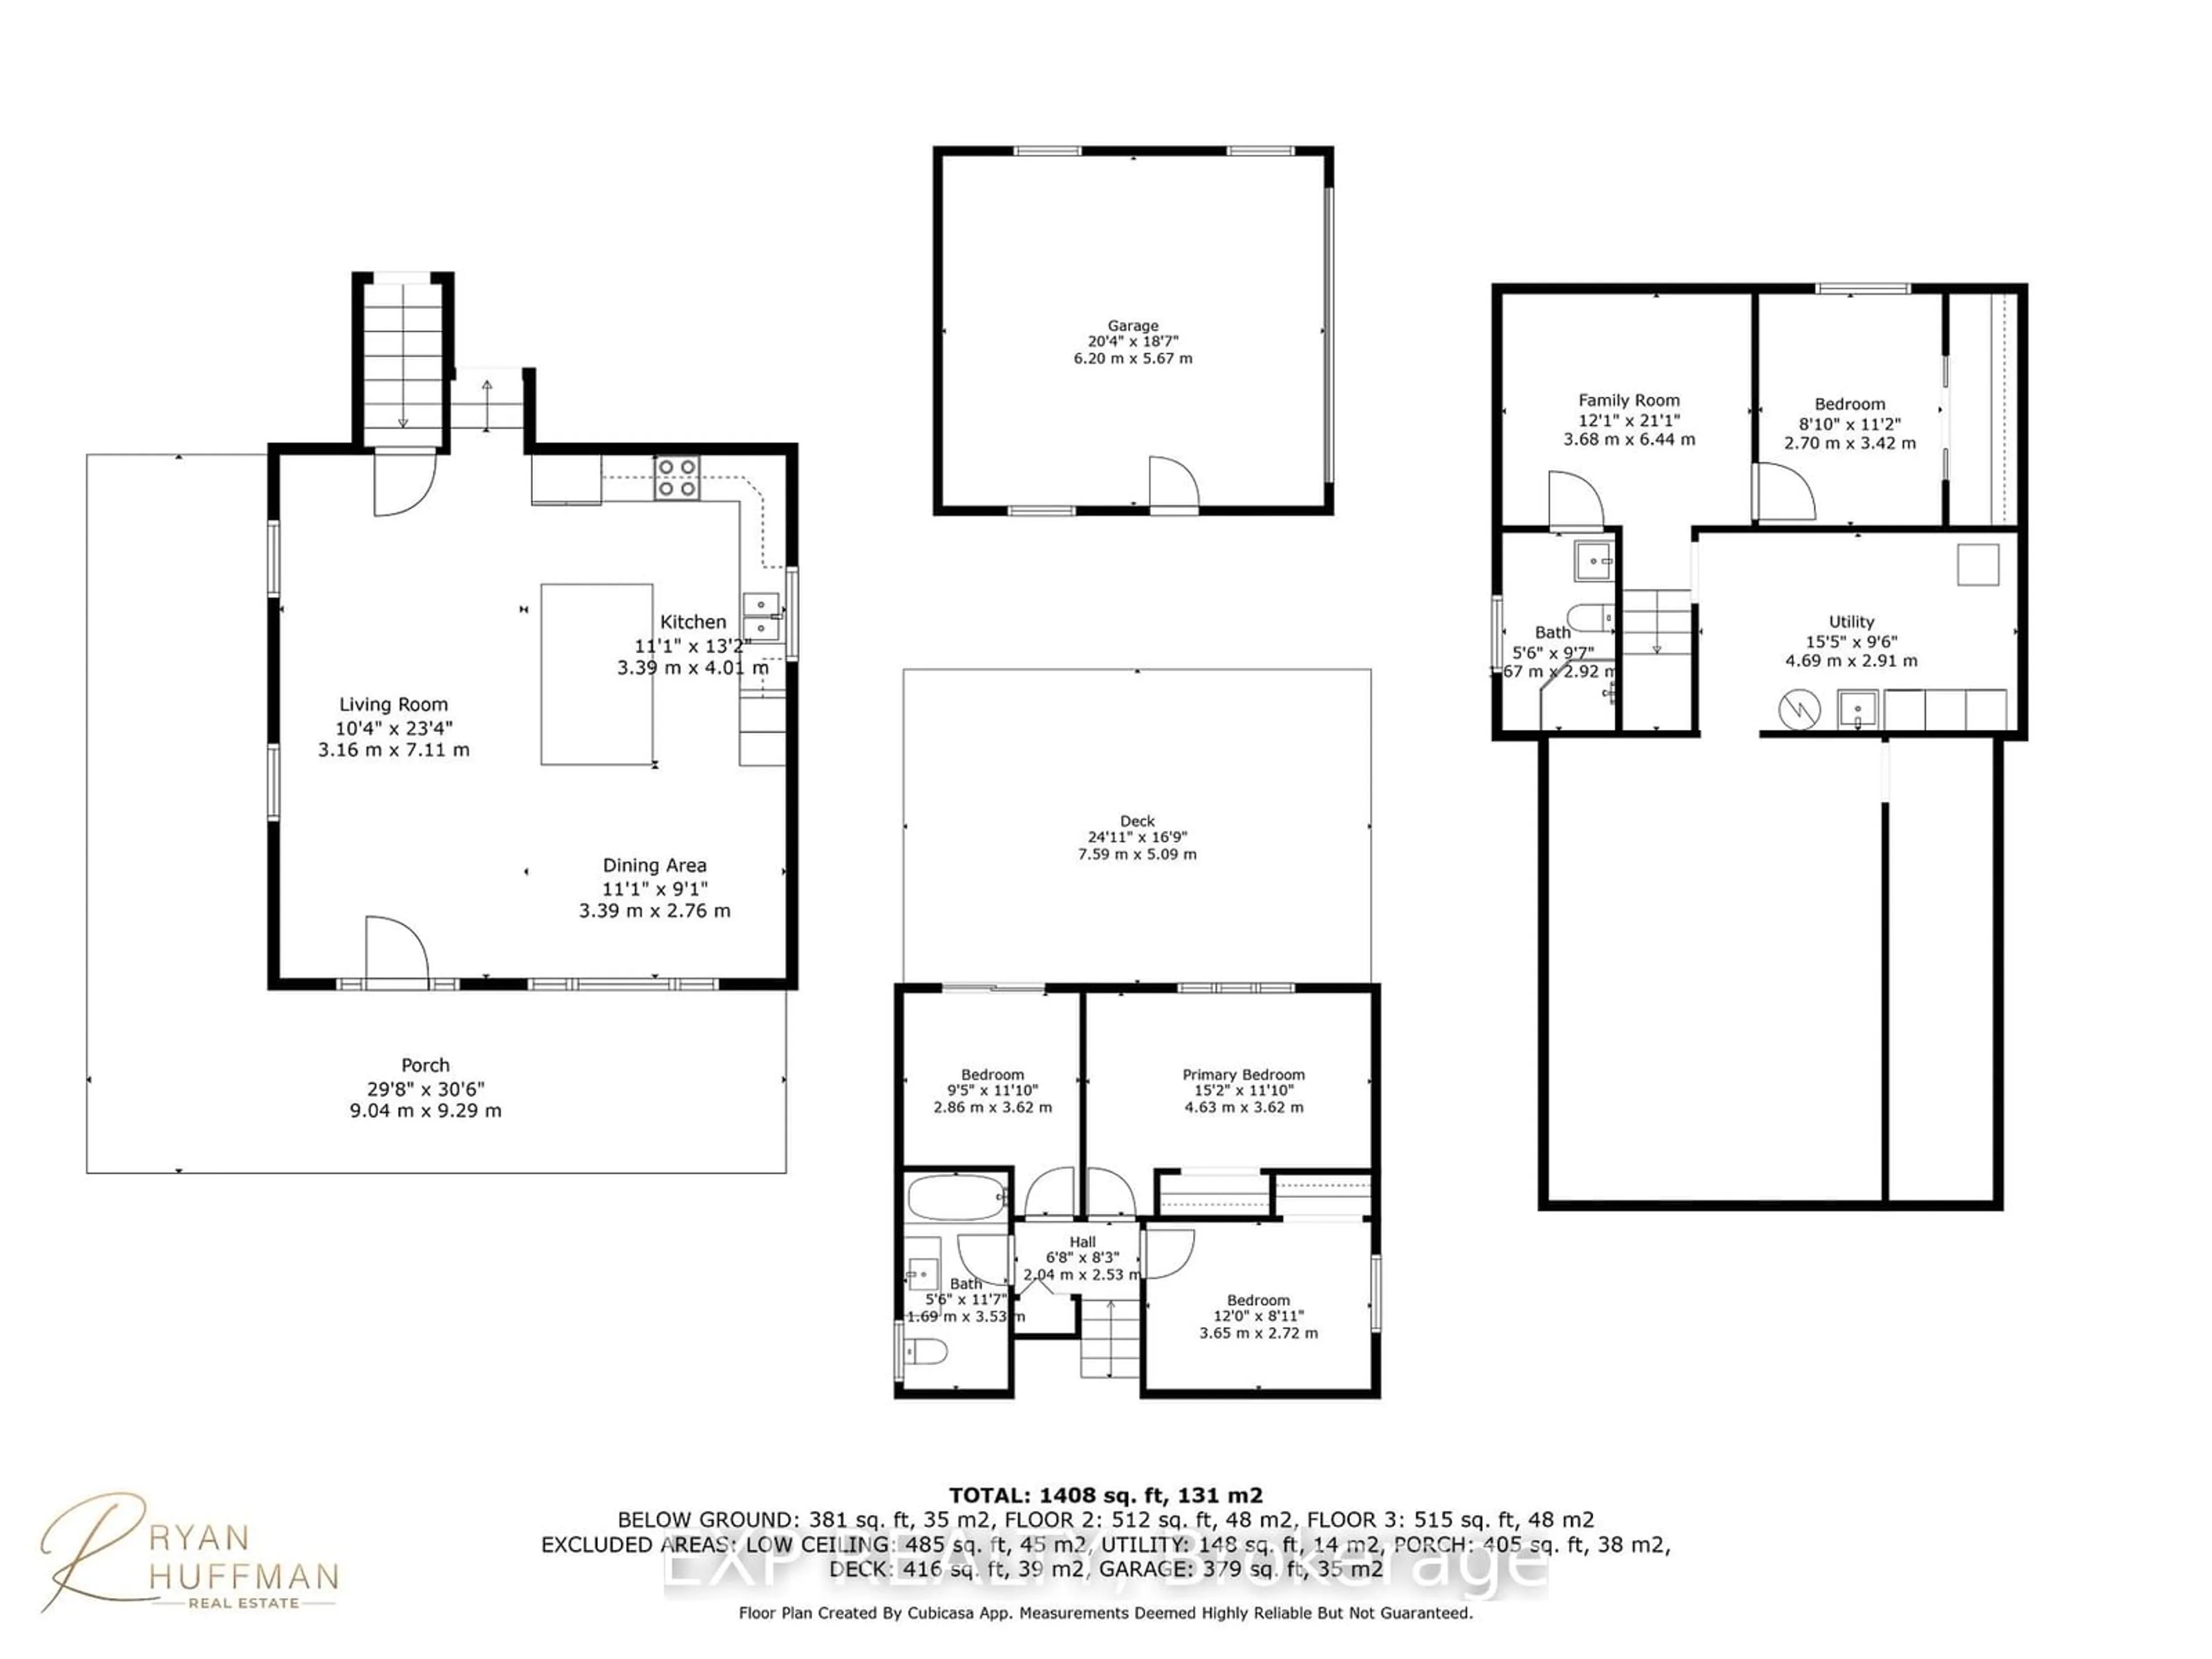 Floor plan for 12 Calgary Rd, Port Hope Ontario L1A 3T8